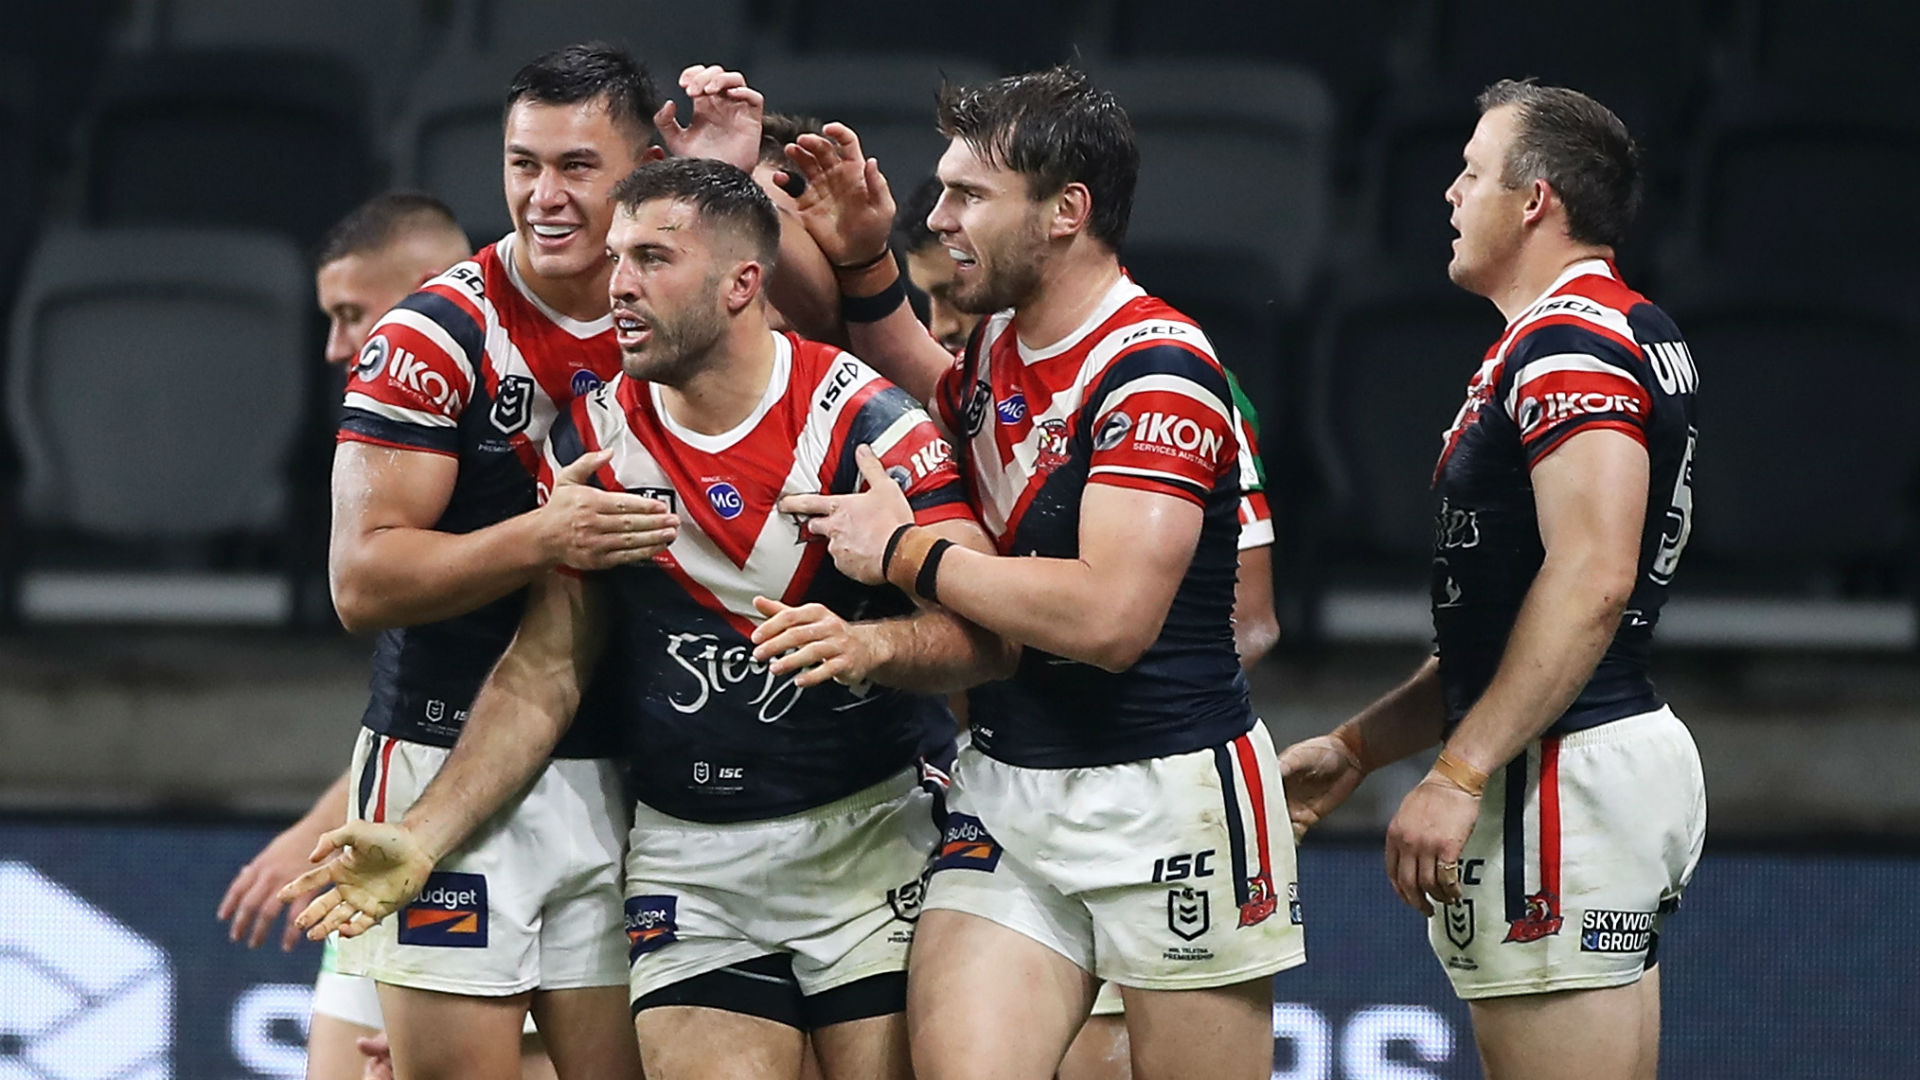 Sydney Roosters and North Queensland Cowboys claimed impressive derby wins in their first games since the hiatus.